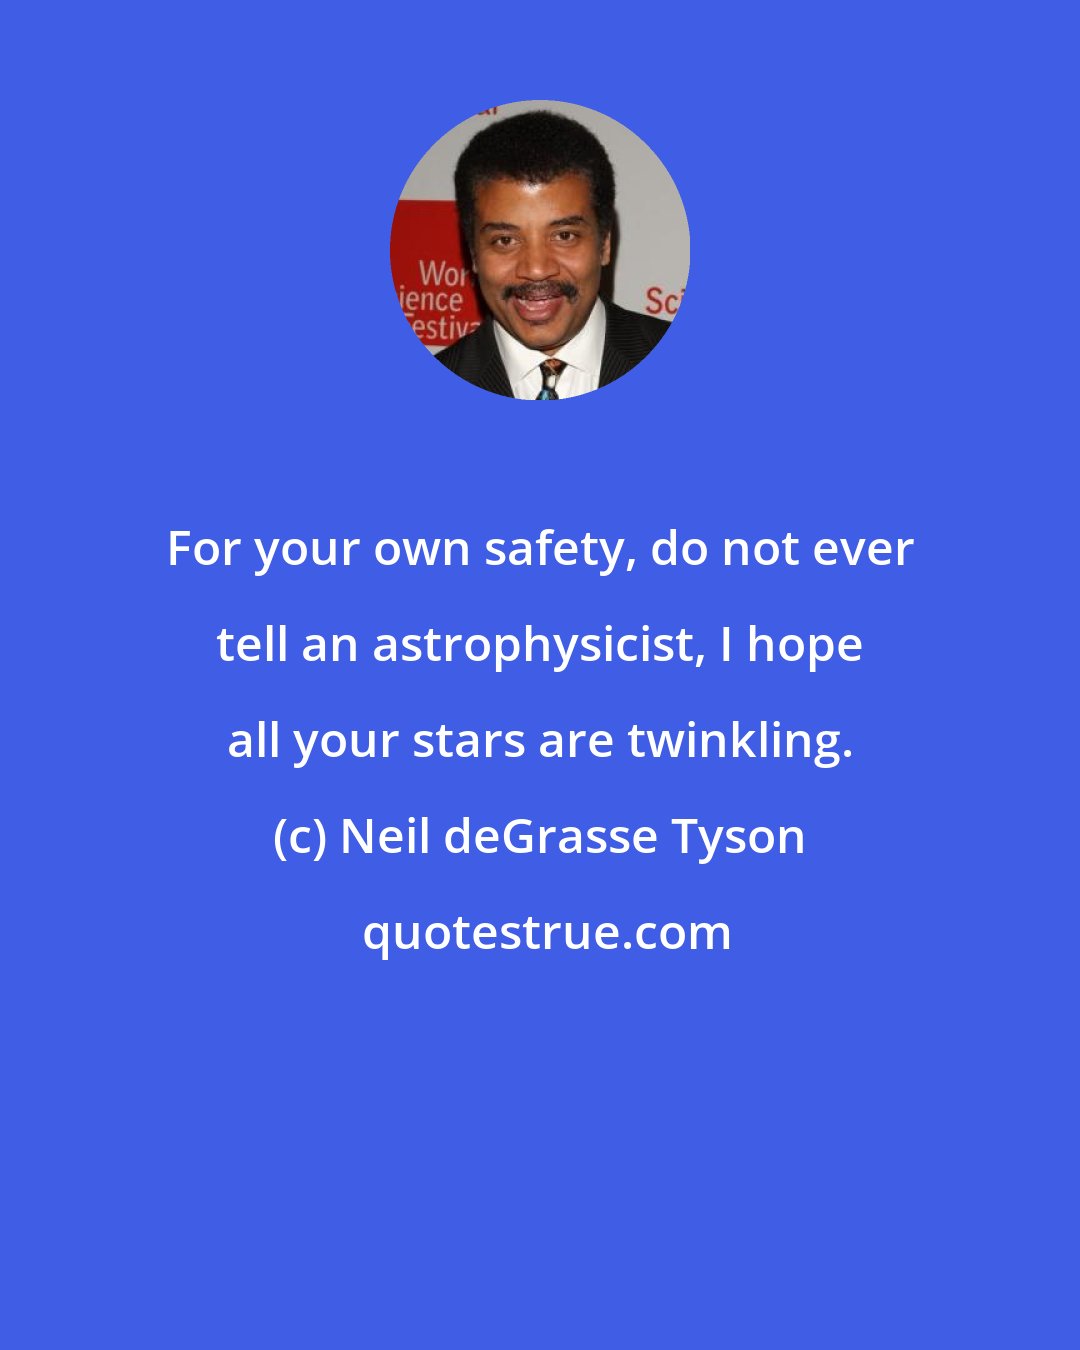 Neil deGrasse Tyson: For your own safety, do not ever tell an astrophysicist, I hope all your stars are twinkling.